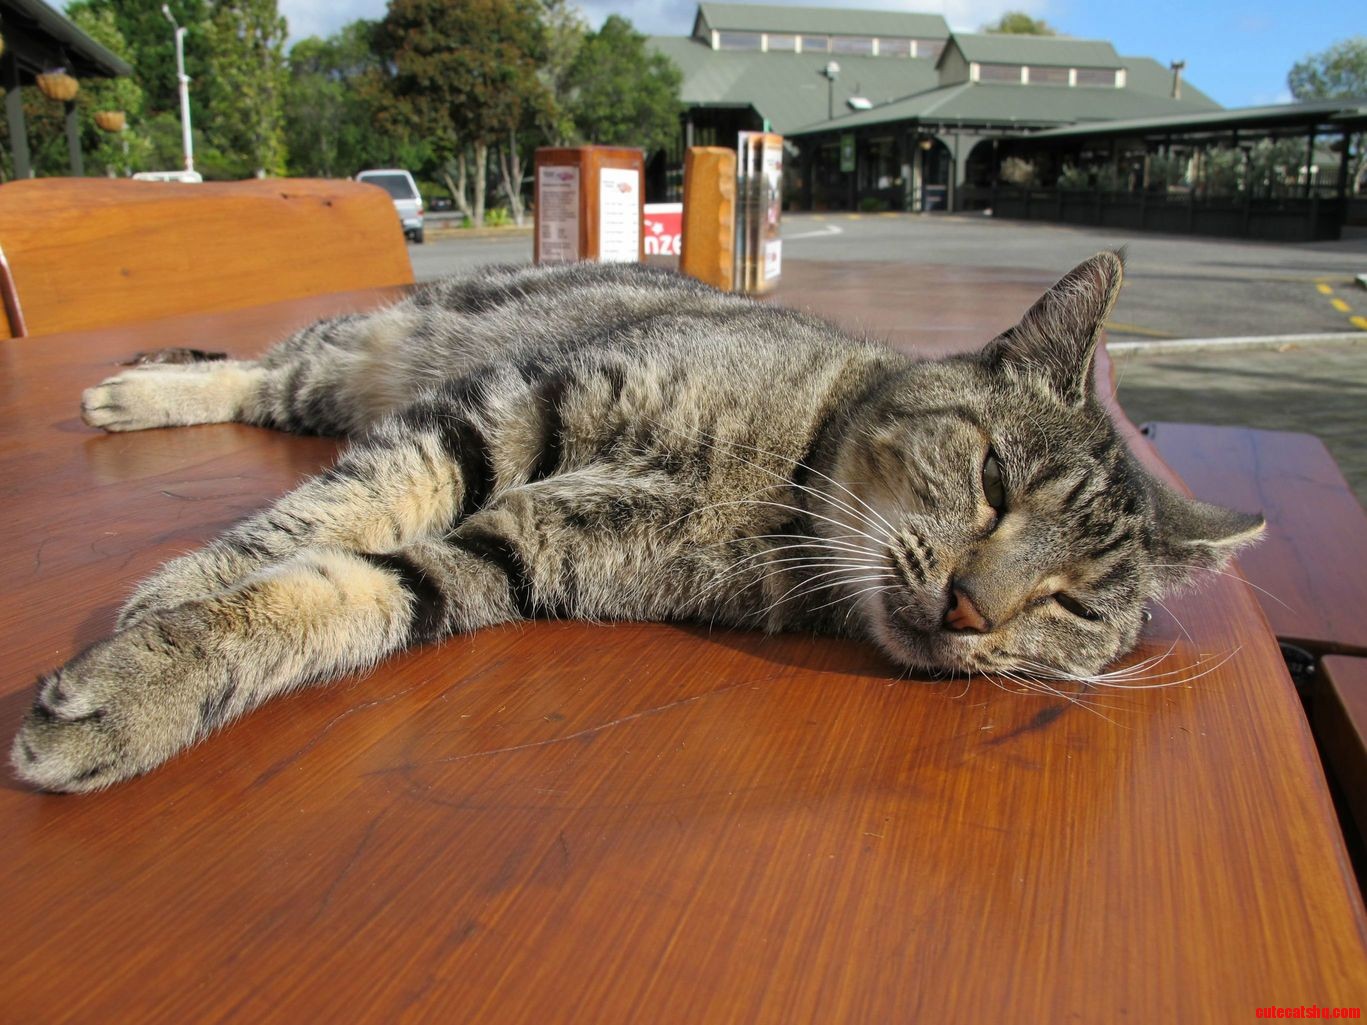 I met this handsome fellow on a day trip to paraparaumu new zealand.